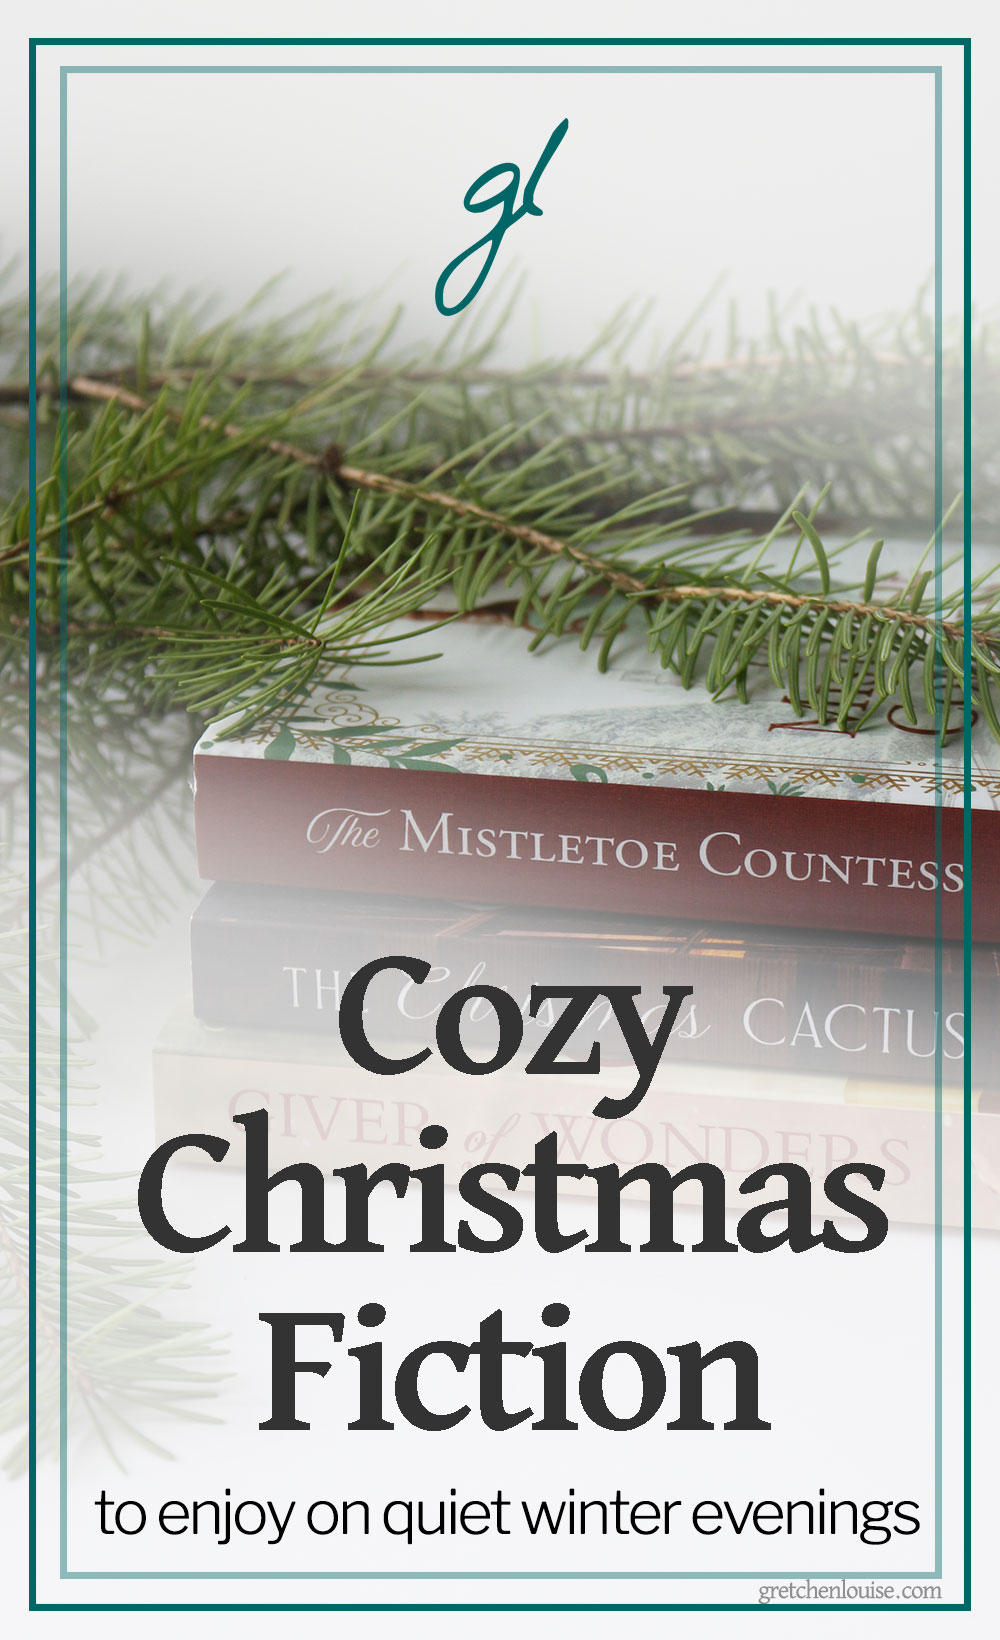 As much as we enjoy classic holiday tales and timeless Christmas picture books, at the end of the day I’m usually ready for some easy, cozy reads. And while I adore watching some of the time-honored Christmas movies, more often than not I prefer the quiet of a good book on a winter evening. via @GretLouise